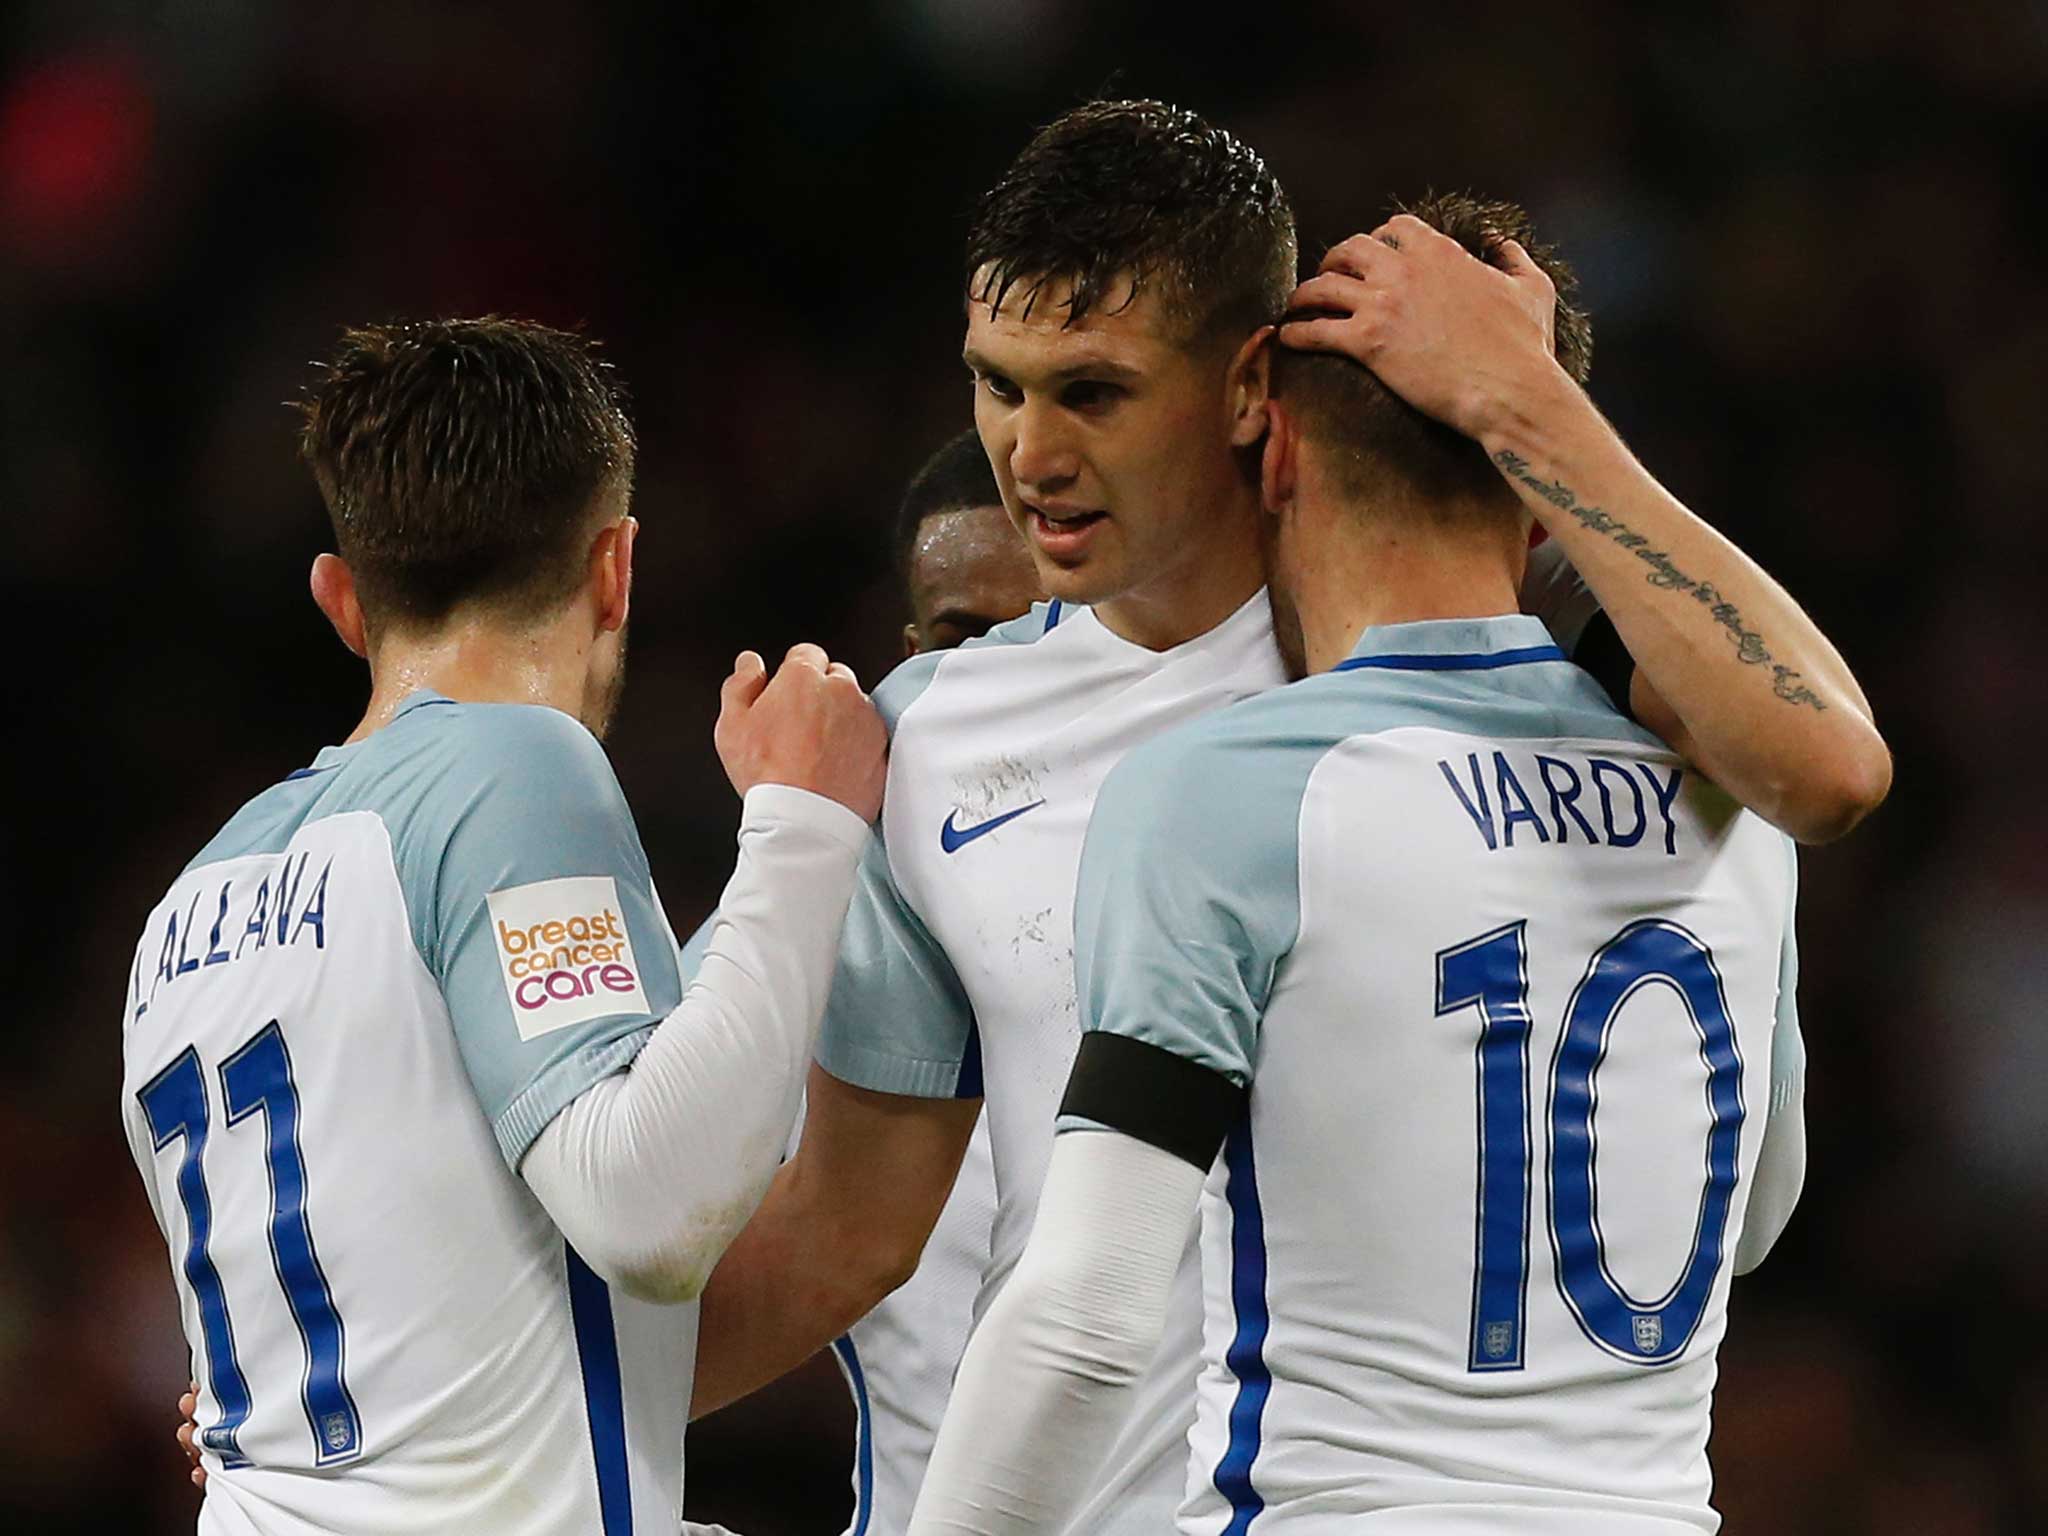 John Stones can be a regular for England after Manchester City switch, says Rio Ferdinand